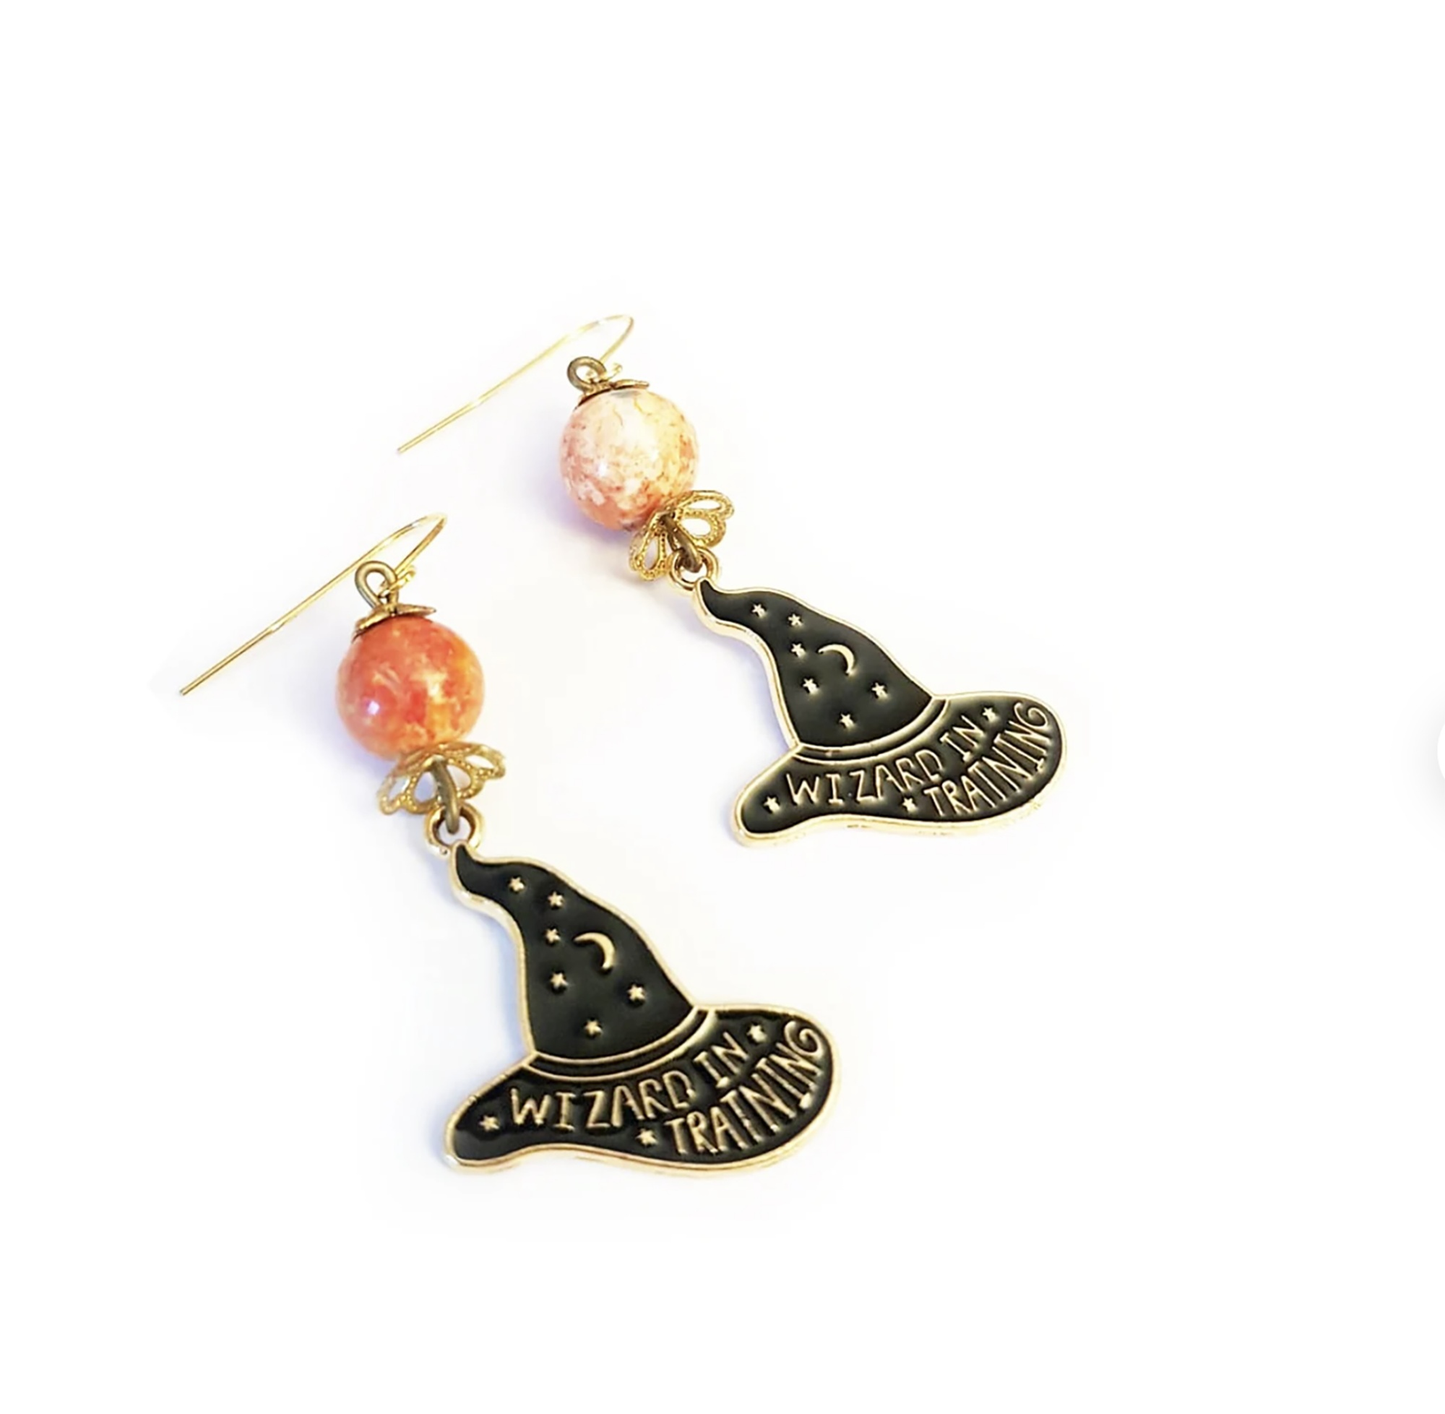 Cast a Spell with These Enchanting Witch Hat Earrings